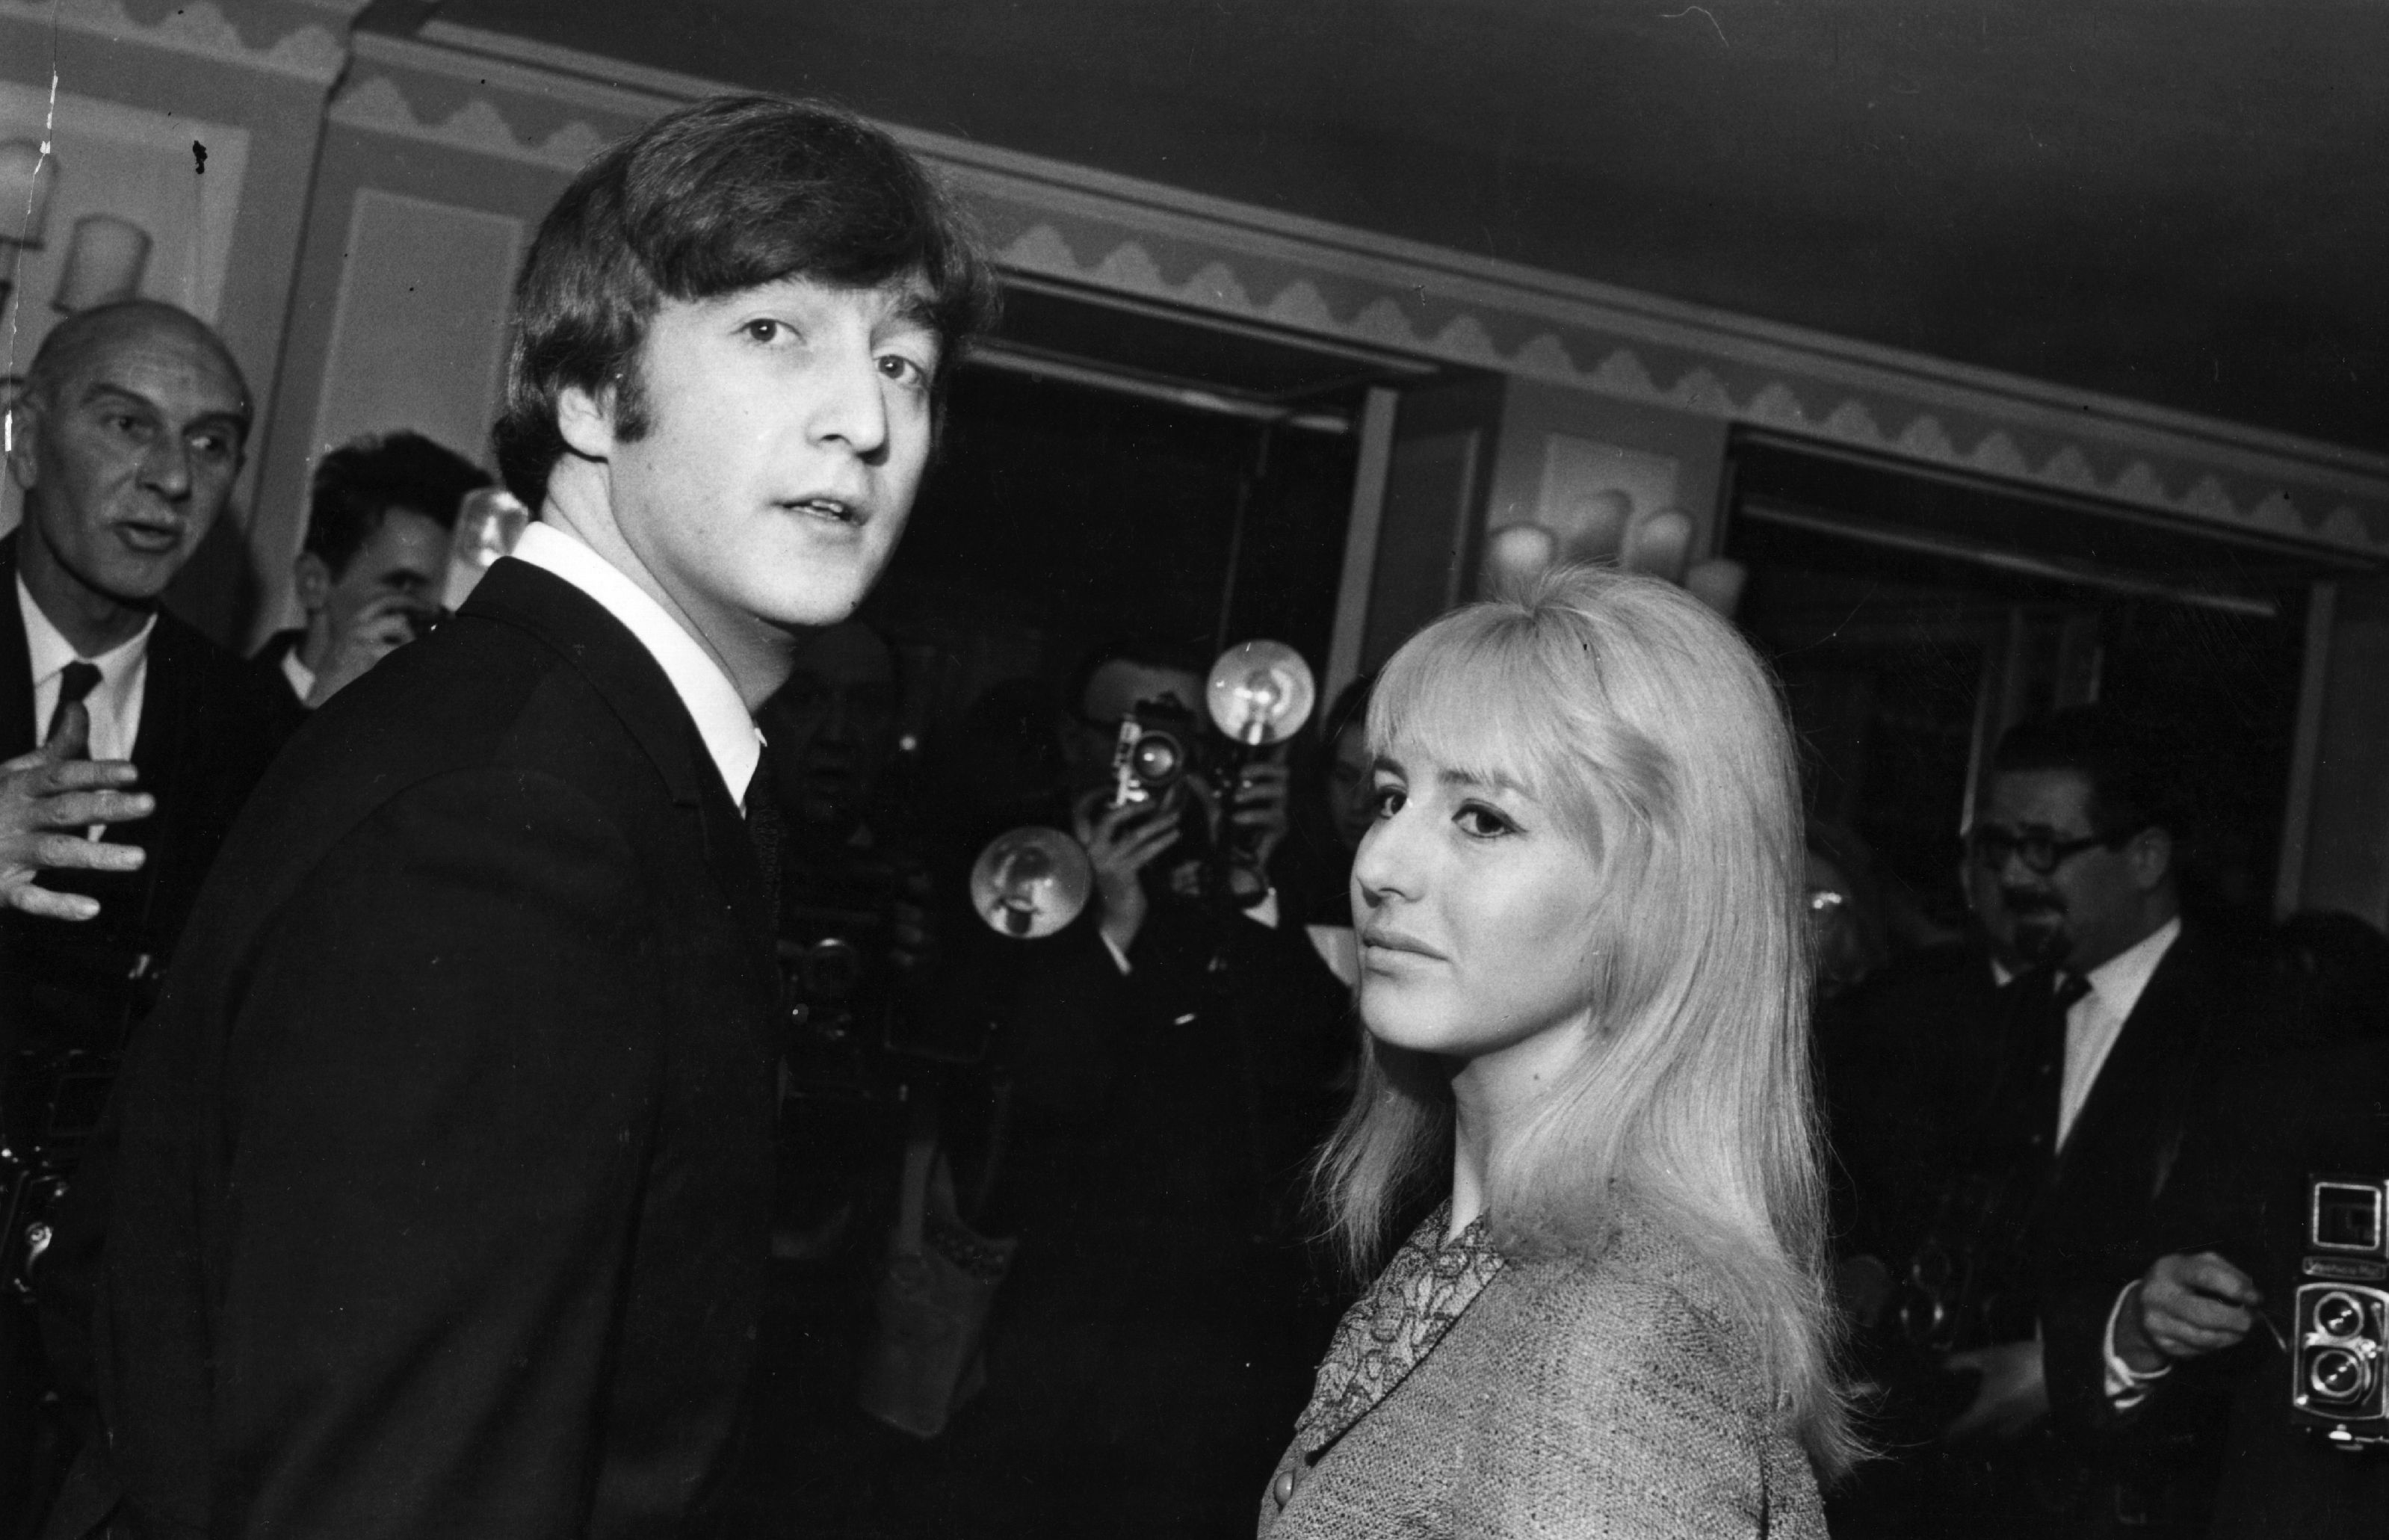 John Lennon and Cynthia Lennon photographed in black and white.